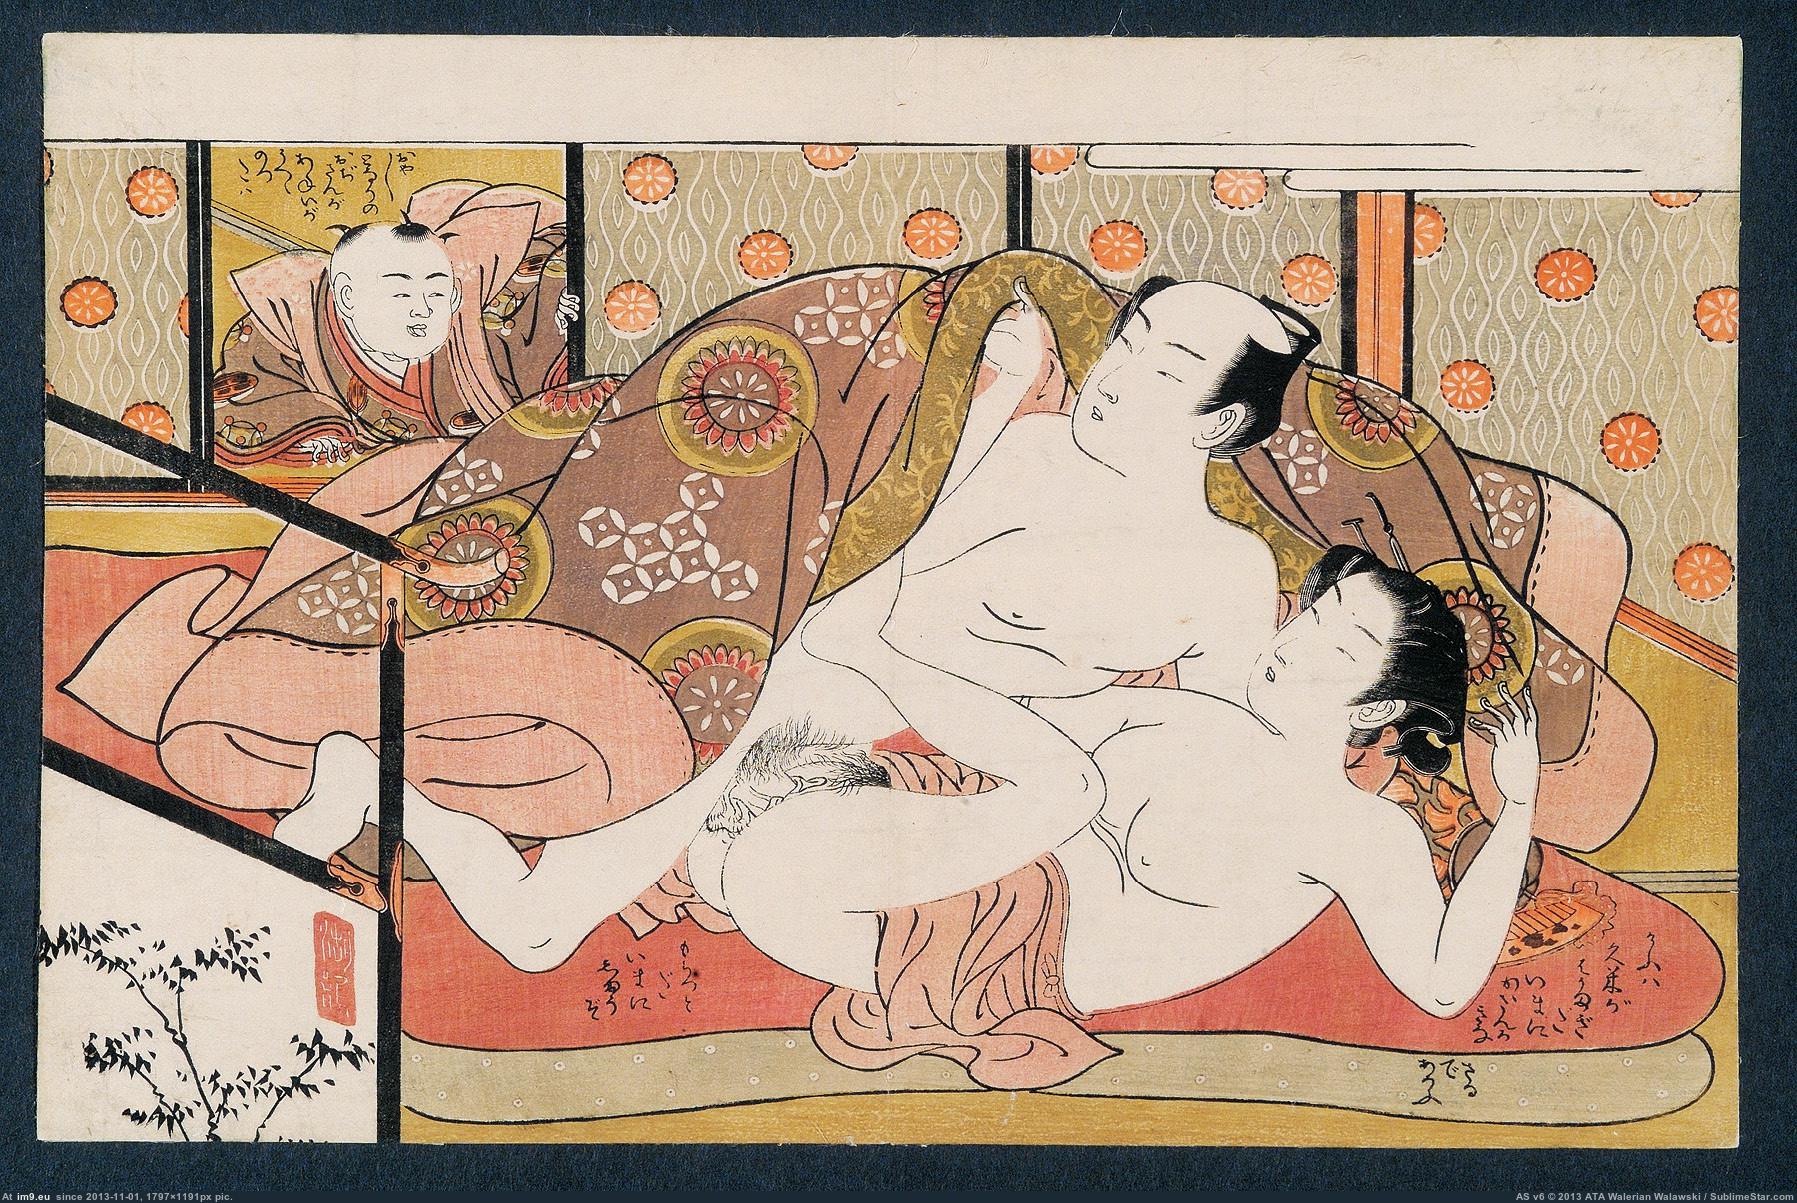 18th Century Sexuality - Pic. #Porn #Wtf #Sex #Was #Century #Disappointed #Exhibition #18th  #Japanese #Not #Pleasure #Nudity, 533873B â€“ My r/WTF favs